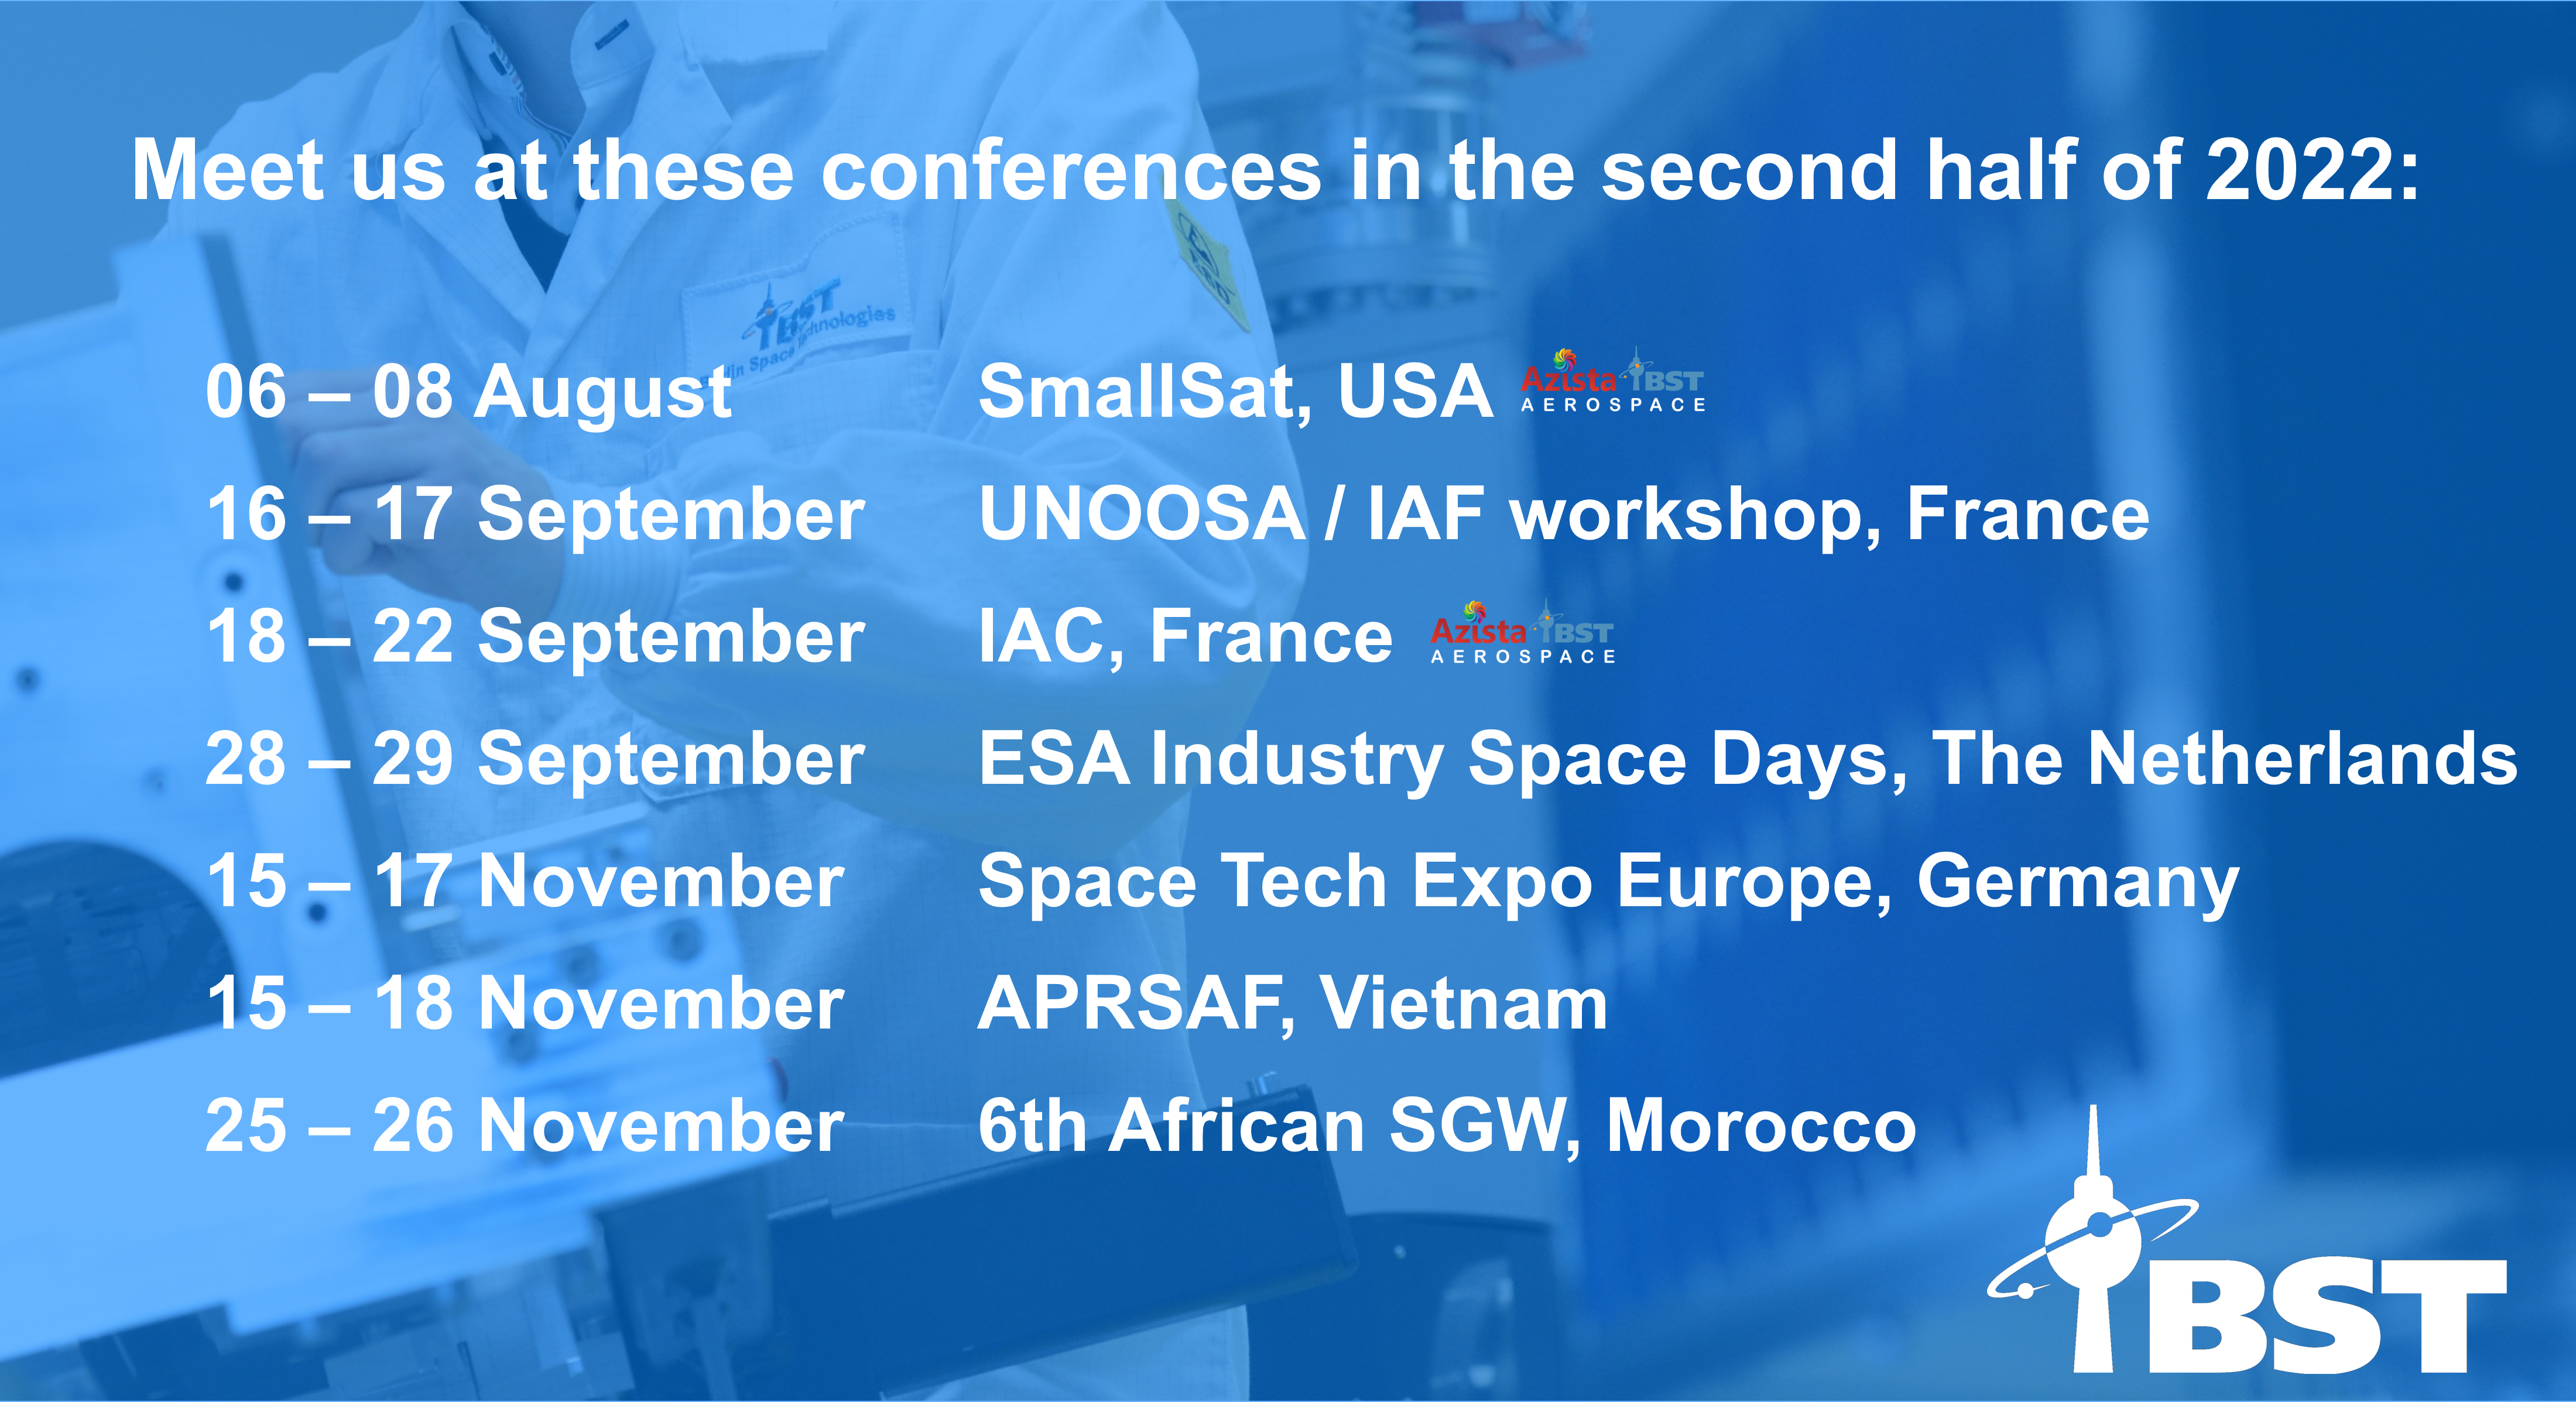 Upcoming conferences in the second half of 2022